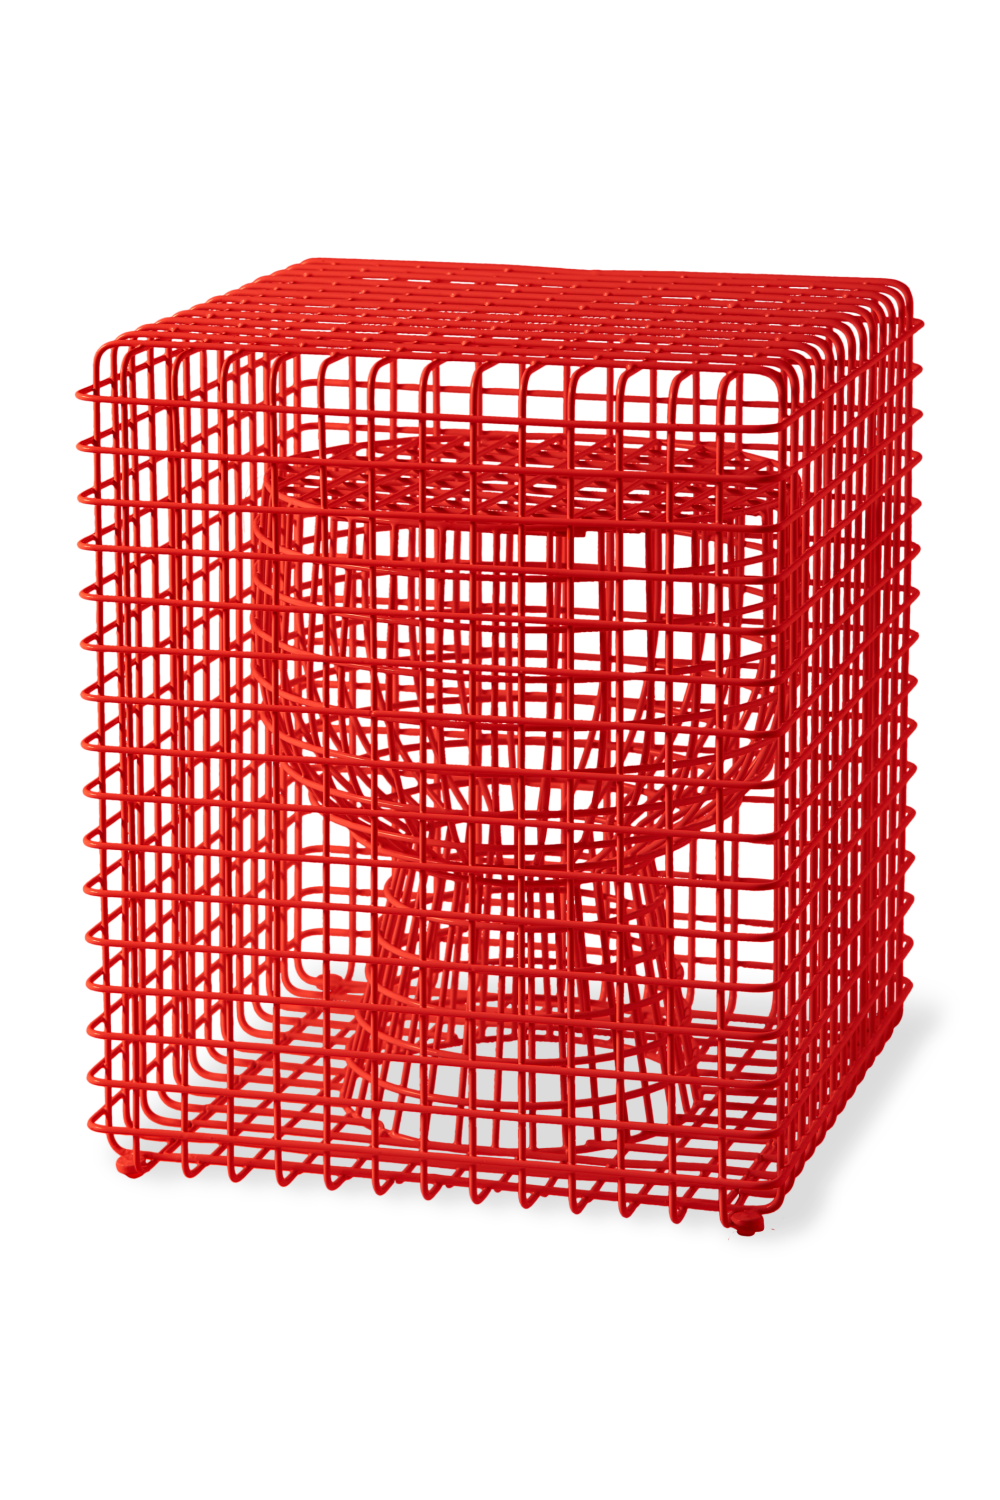 Red Wired Stool | Pols Potten Tip Tap | Oroatrade.com